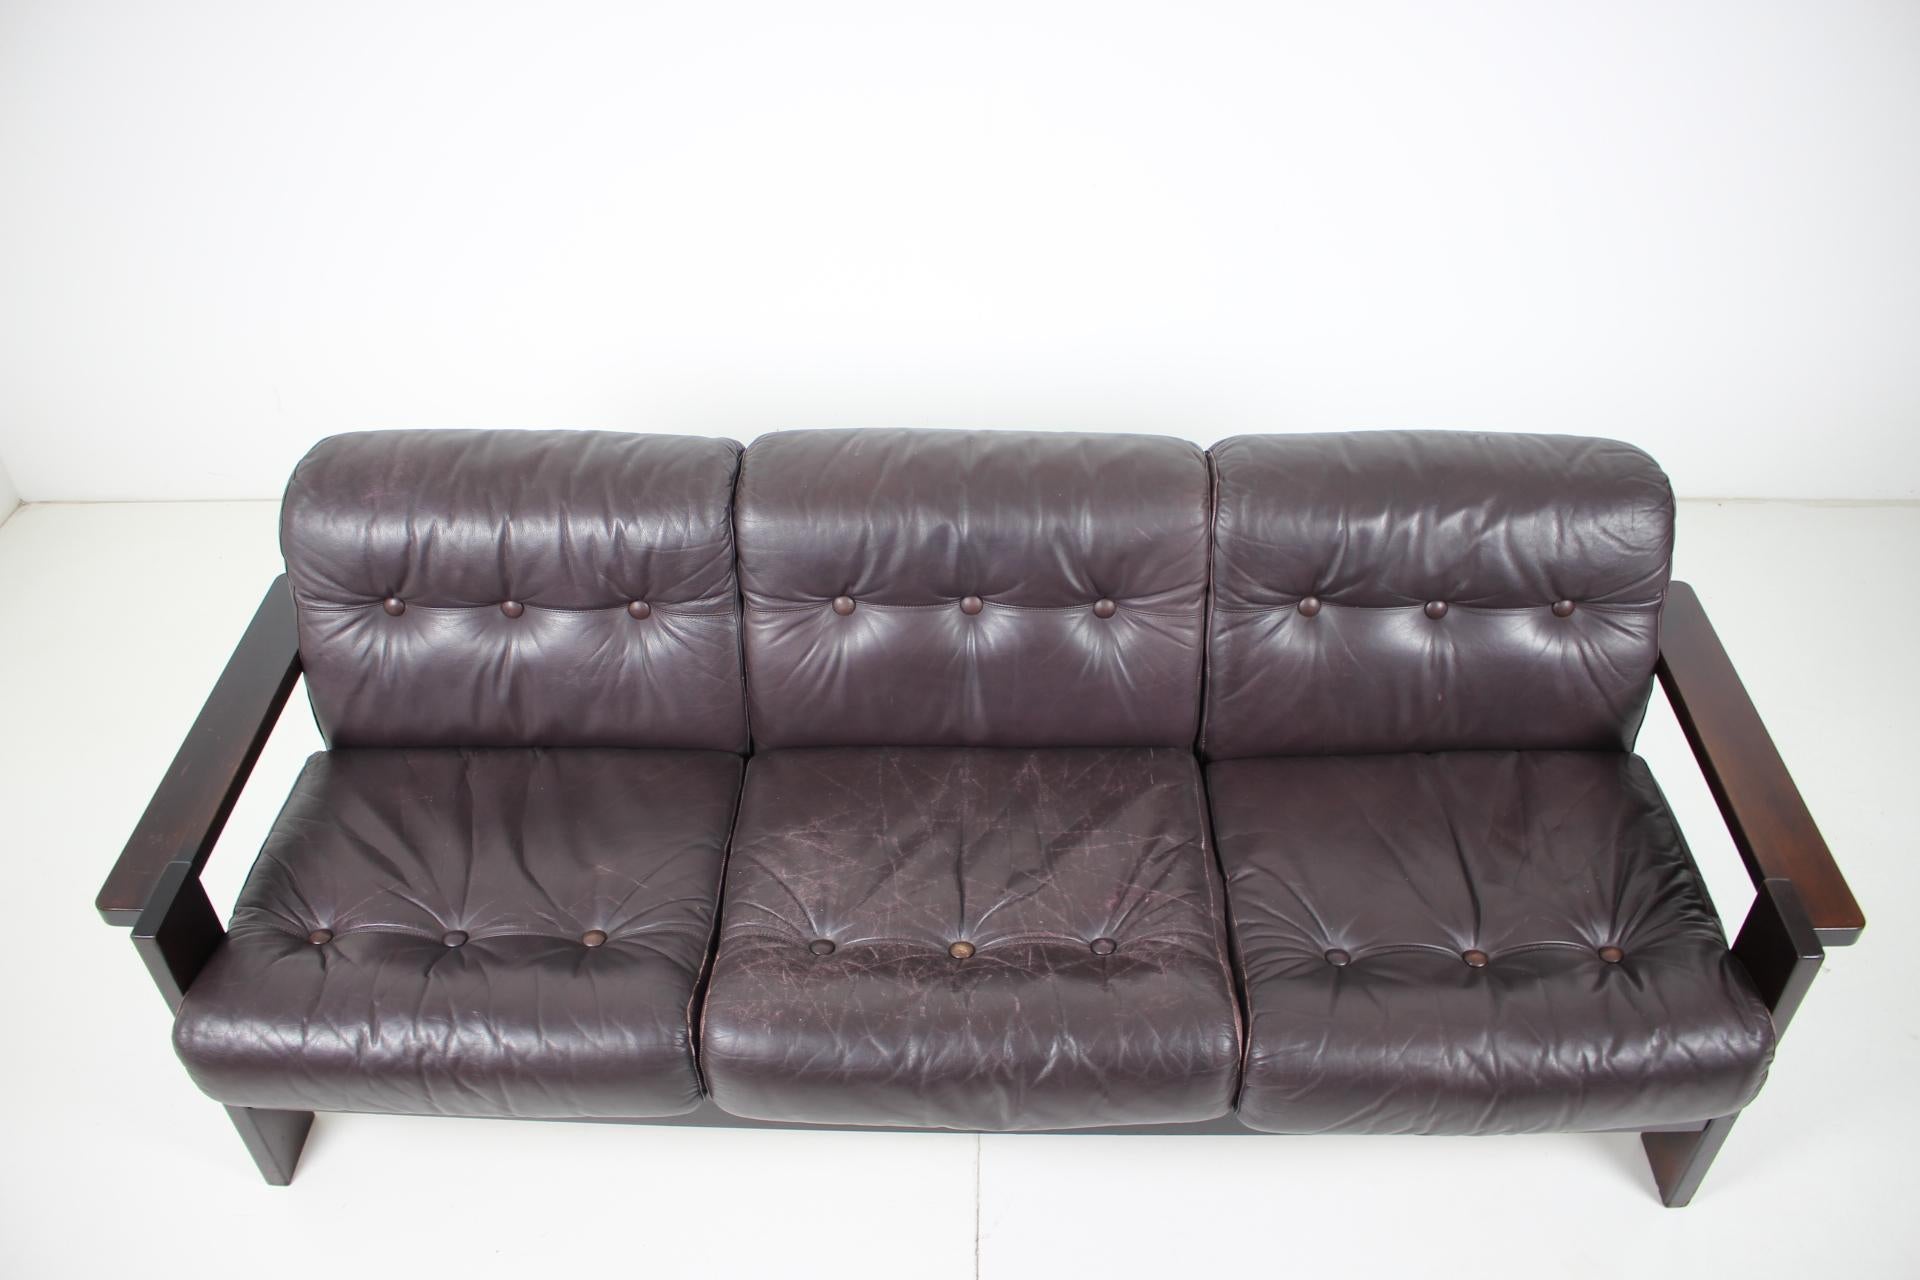 - 1960s, Scandinavia
- Good original condition
- Leather with patina.
- Cleaned
- Dark purple leather.